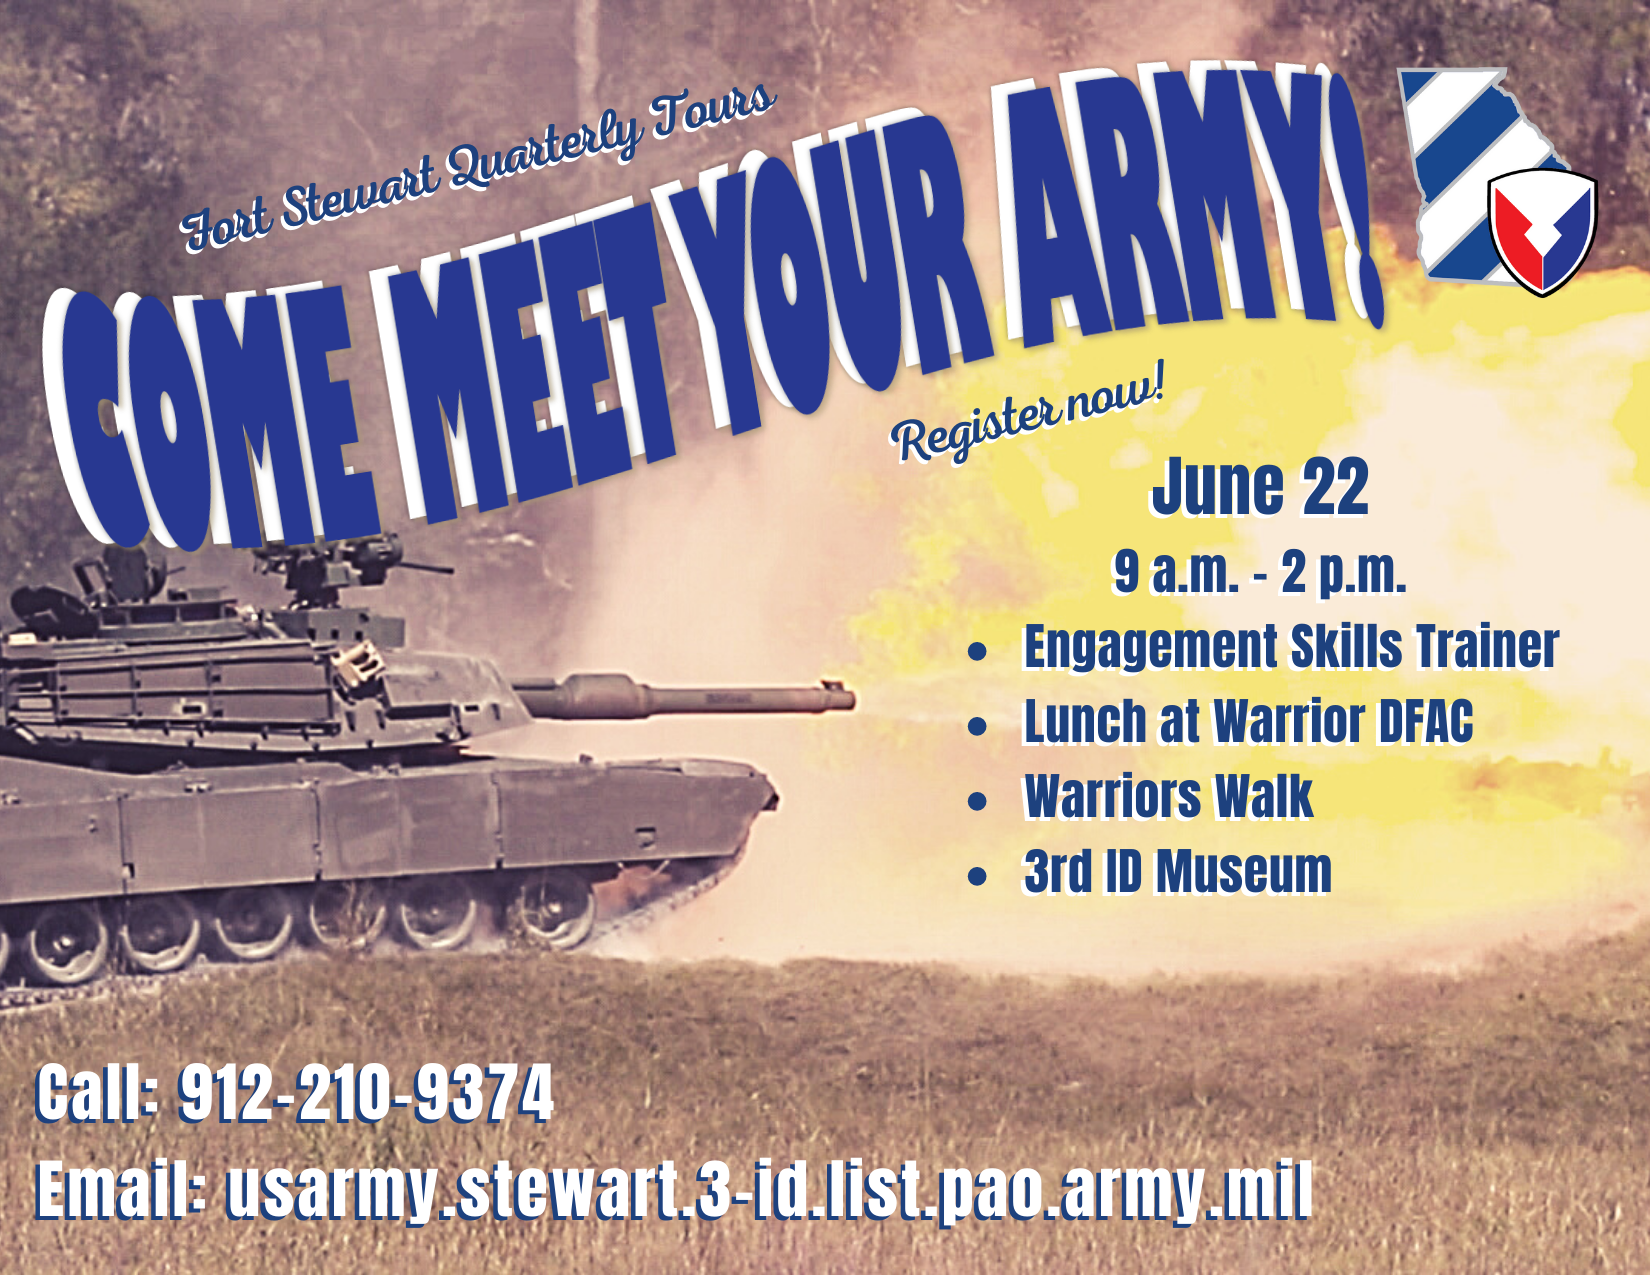 Come Meet Your Army